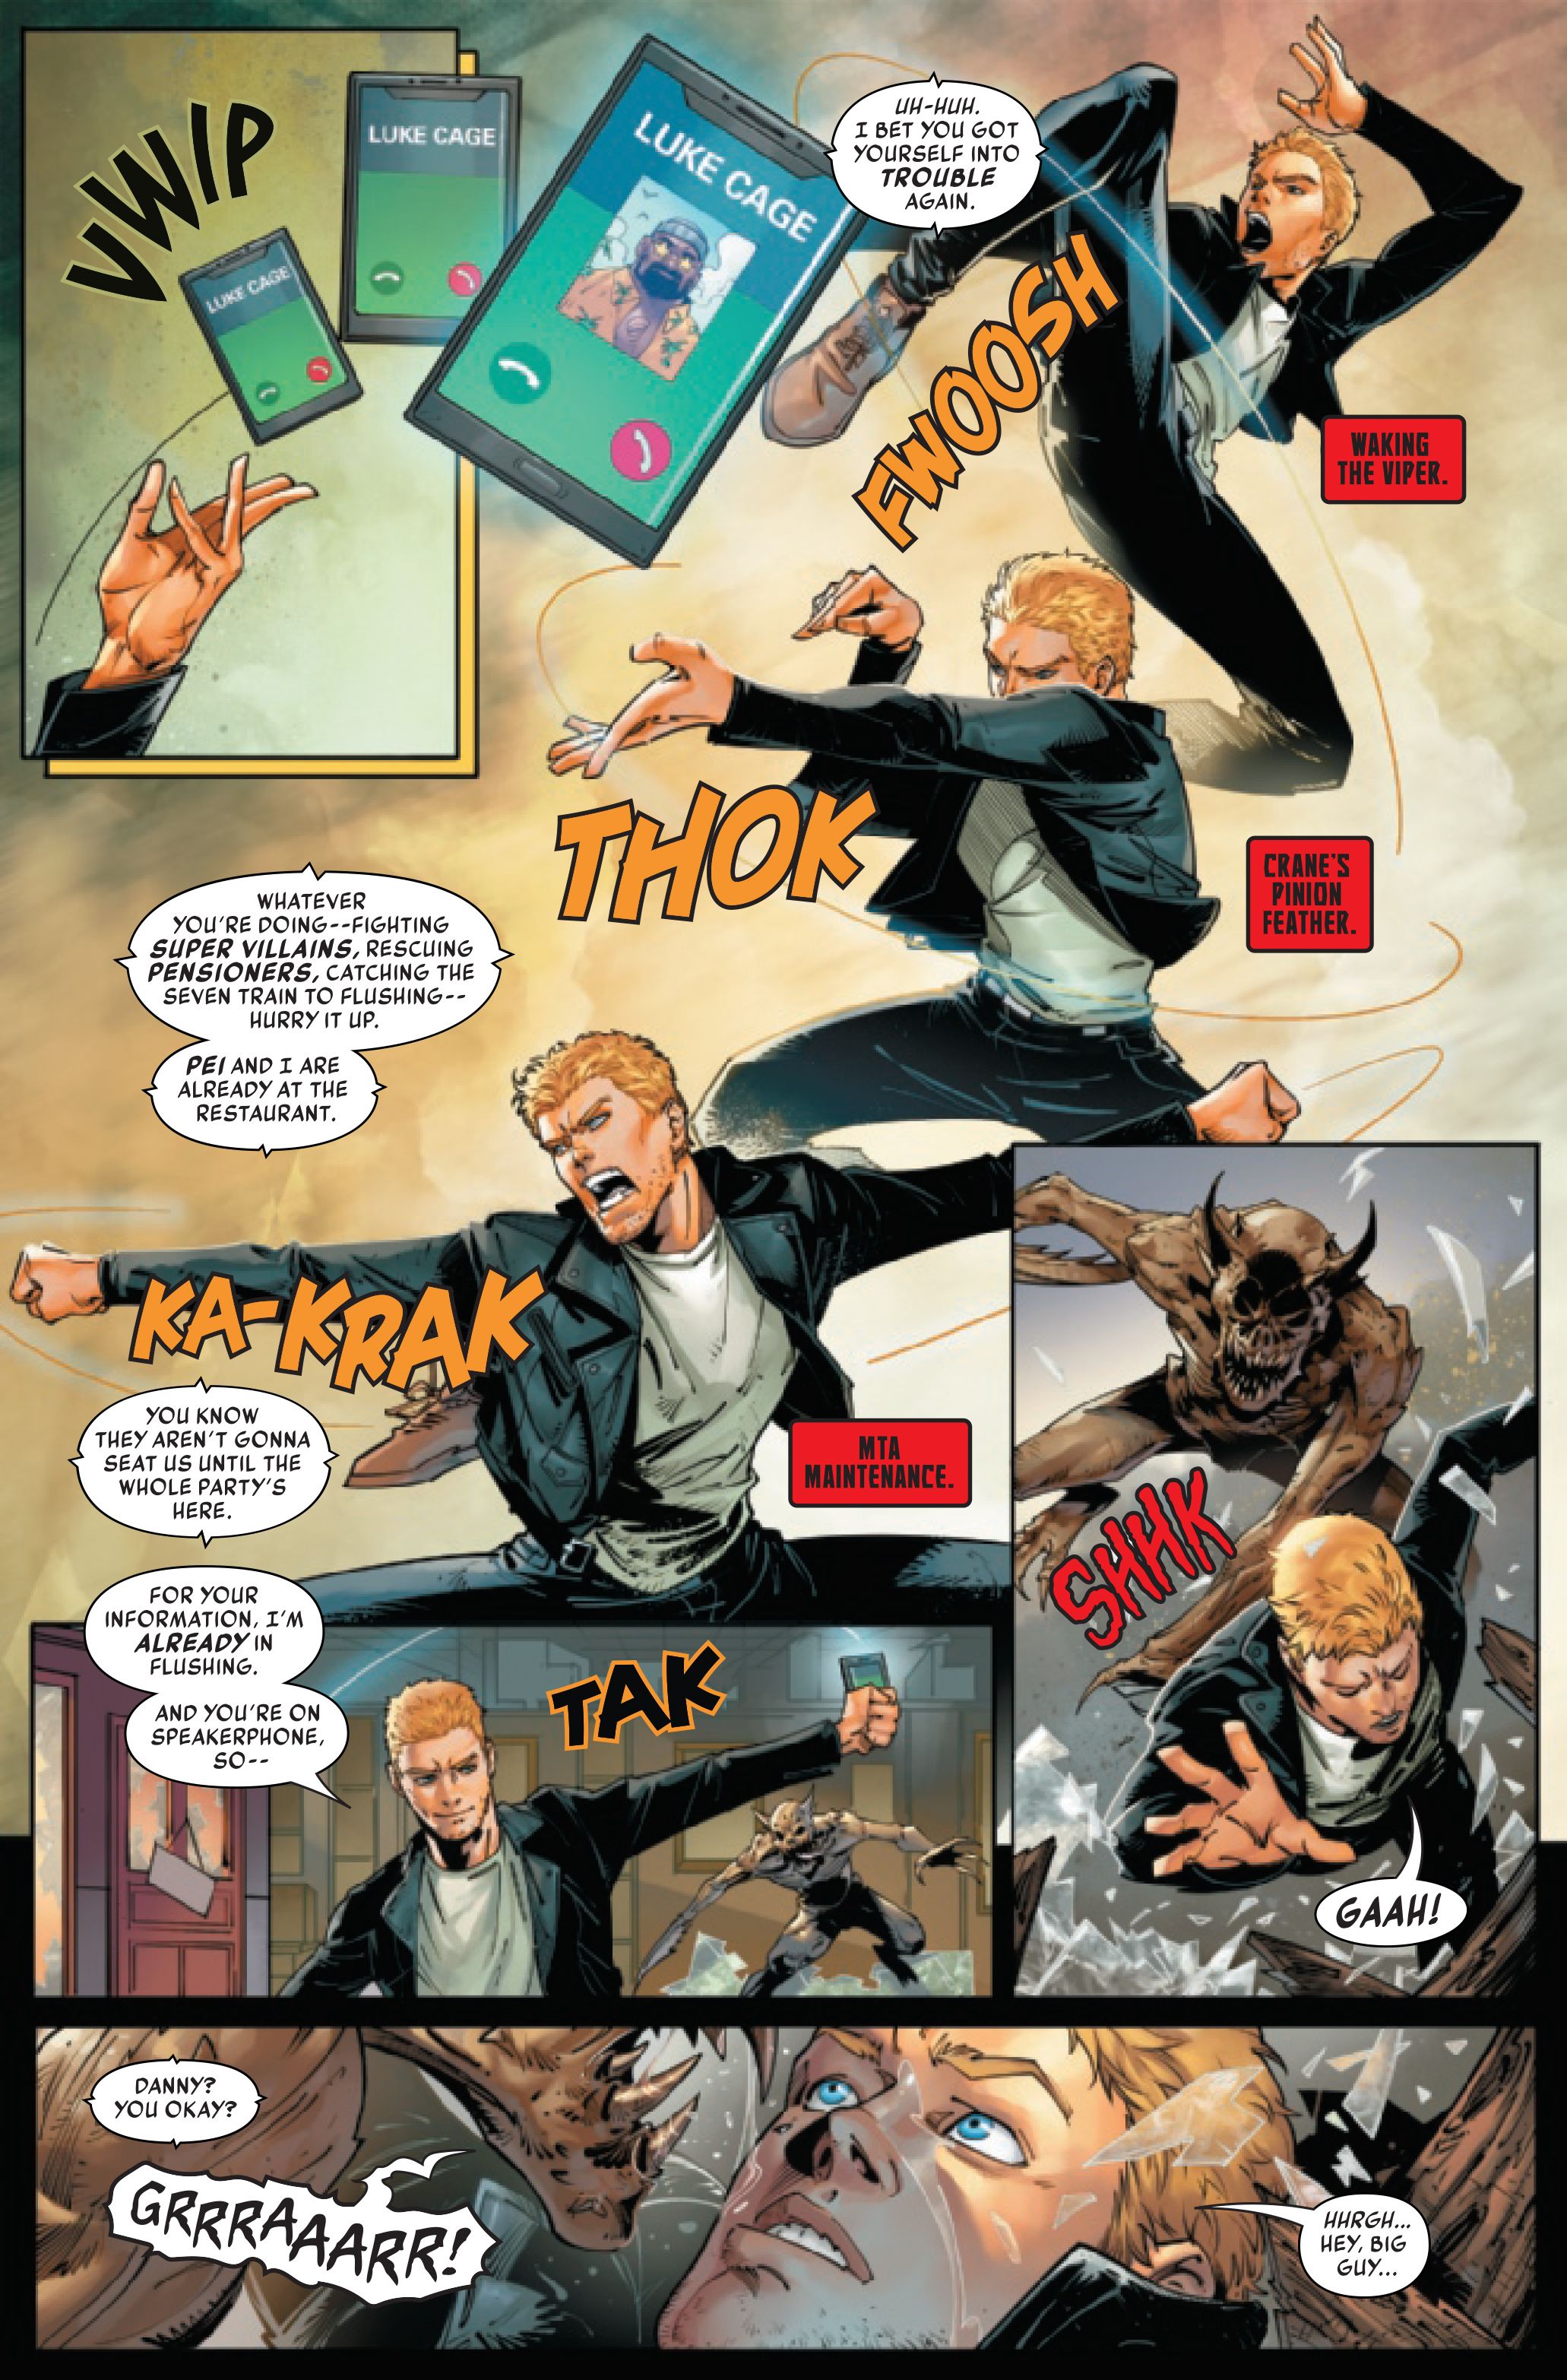 Page 2 of Iron Fist #1